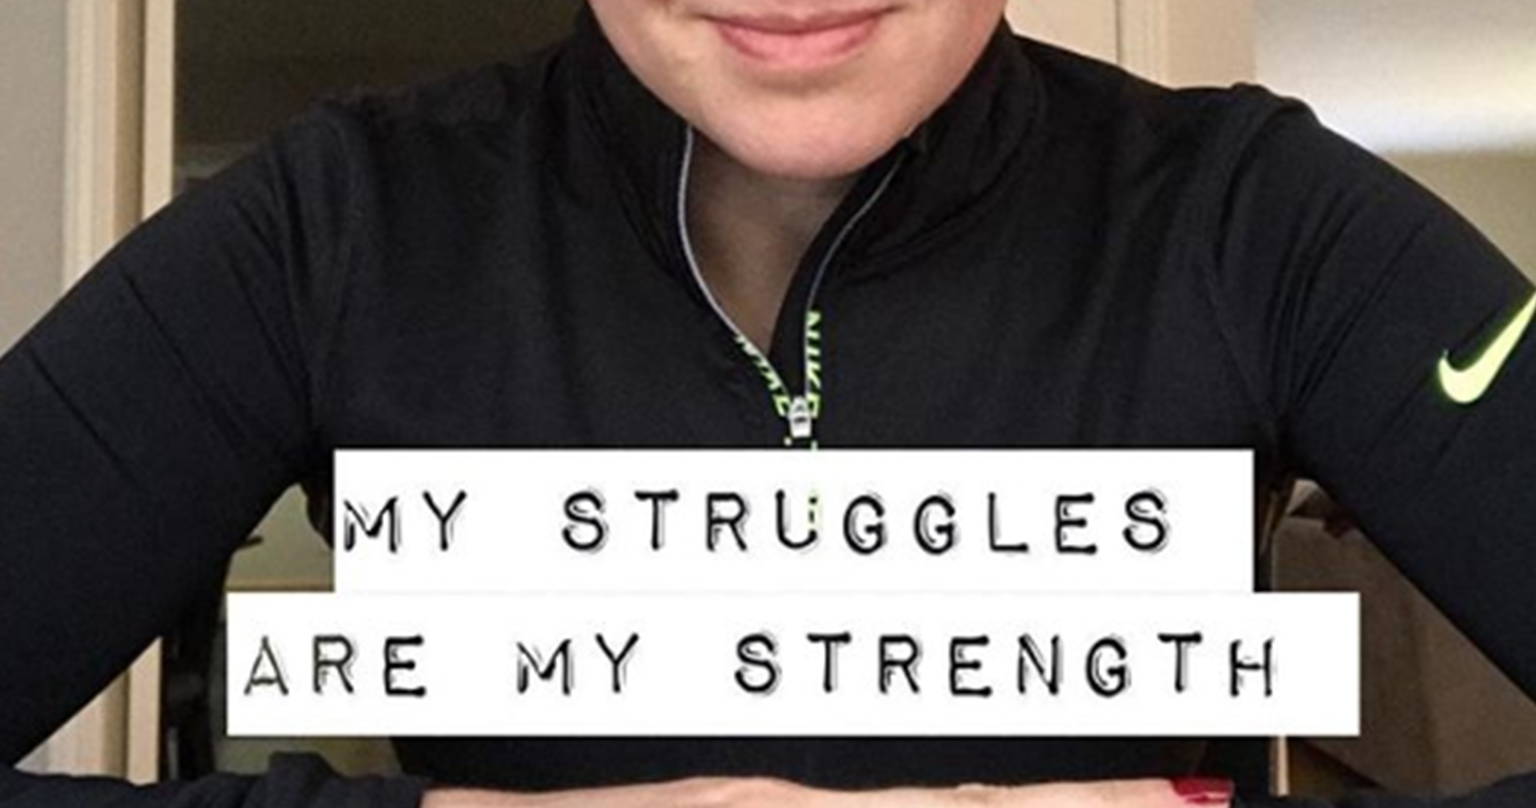 Text reading "my struggles are my strength" covering a woman